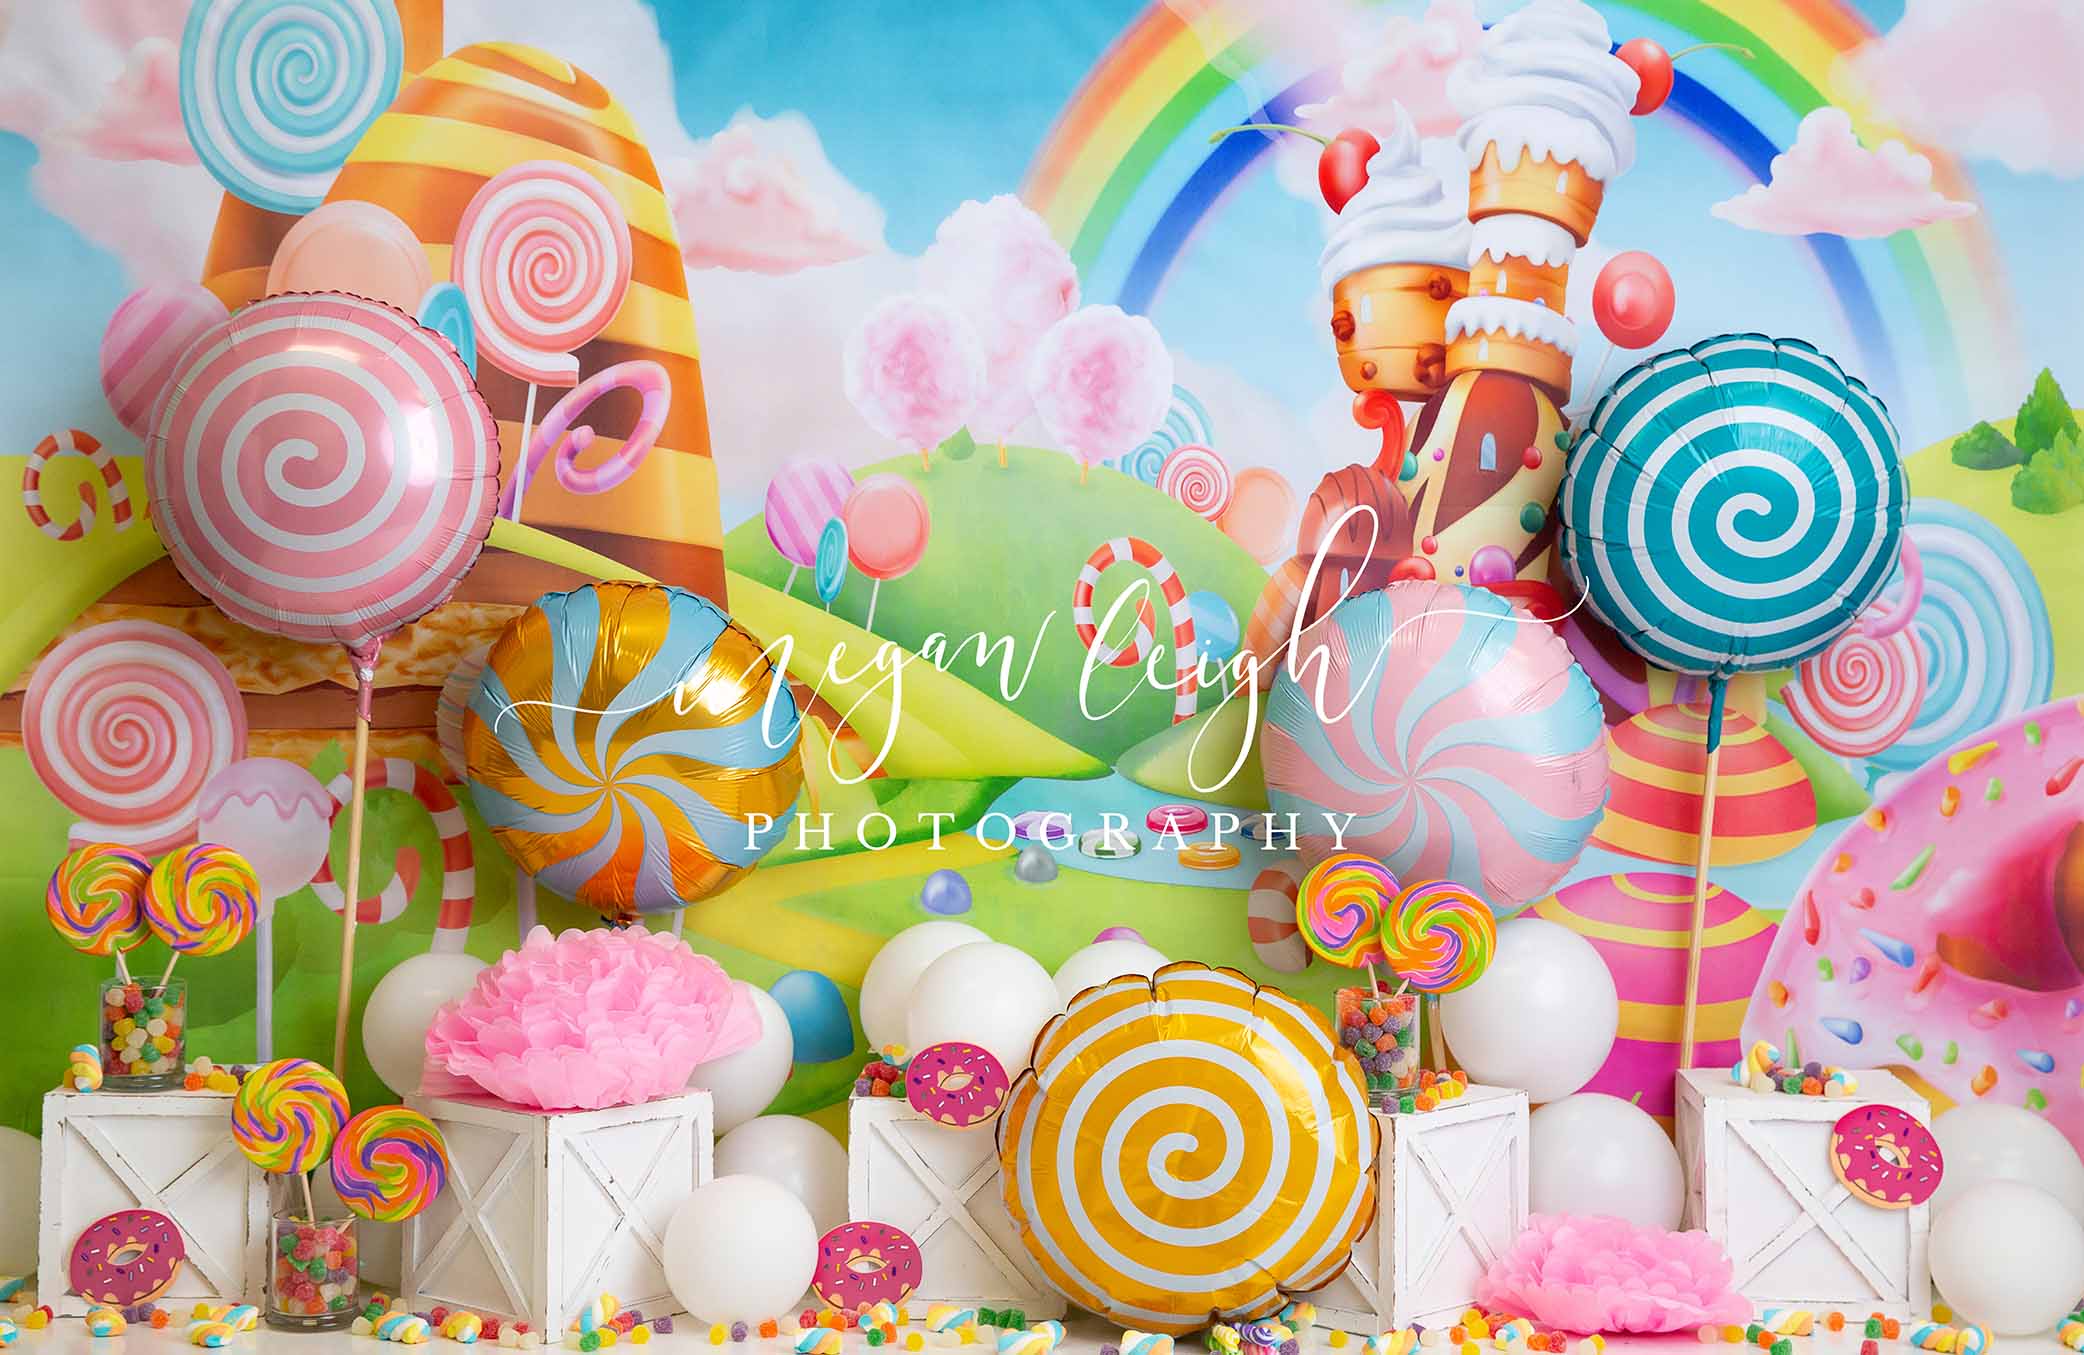 Kate sweets treats Backdrop Cake Smash Designed by Megan Leigh Photography